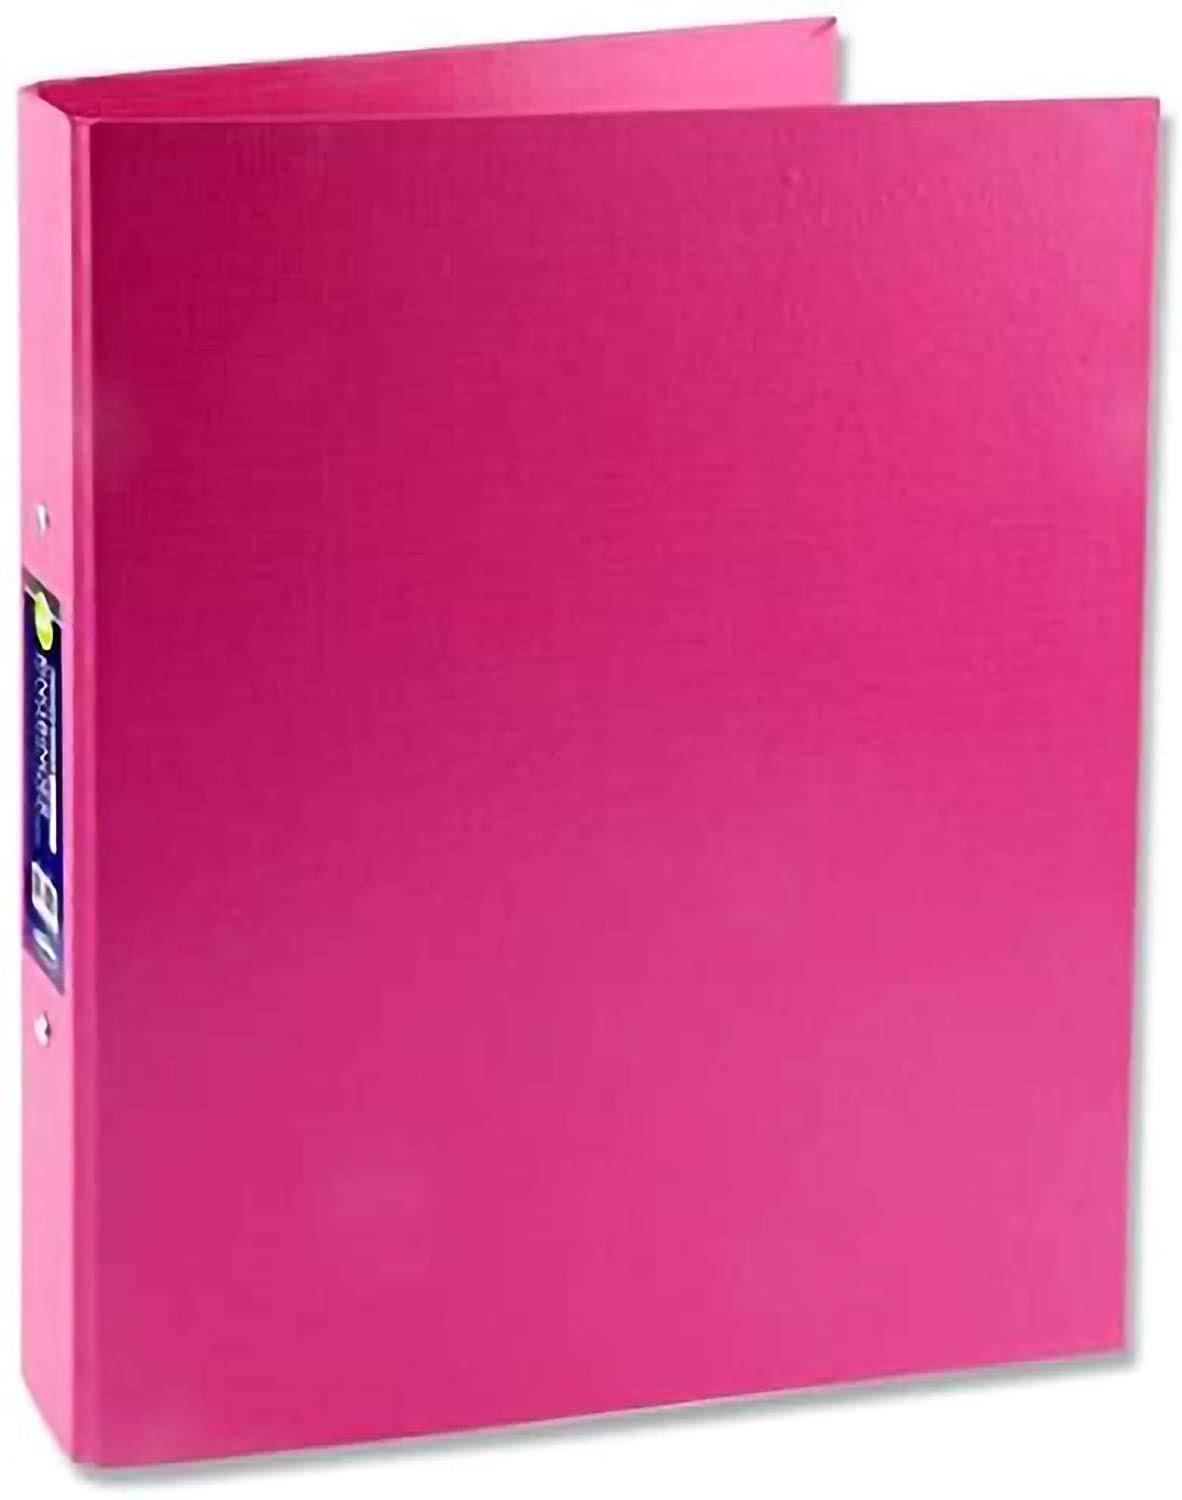 Premier Stationery D2050826 A4 Office Ringbinder Durable PP Cover - Multi-Colour (Pack of 20)